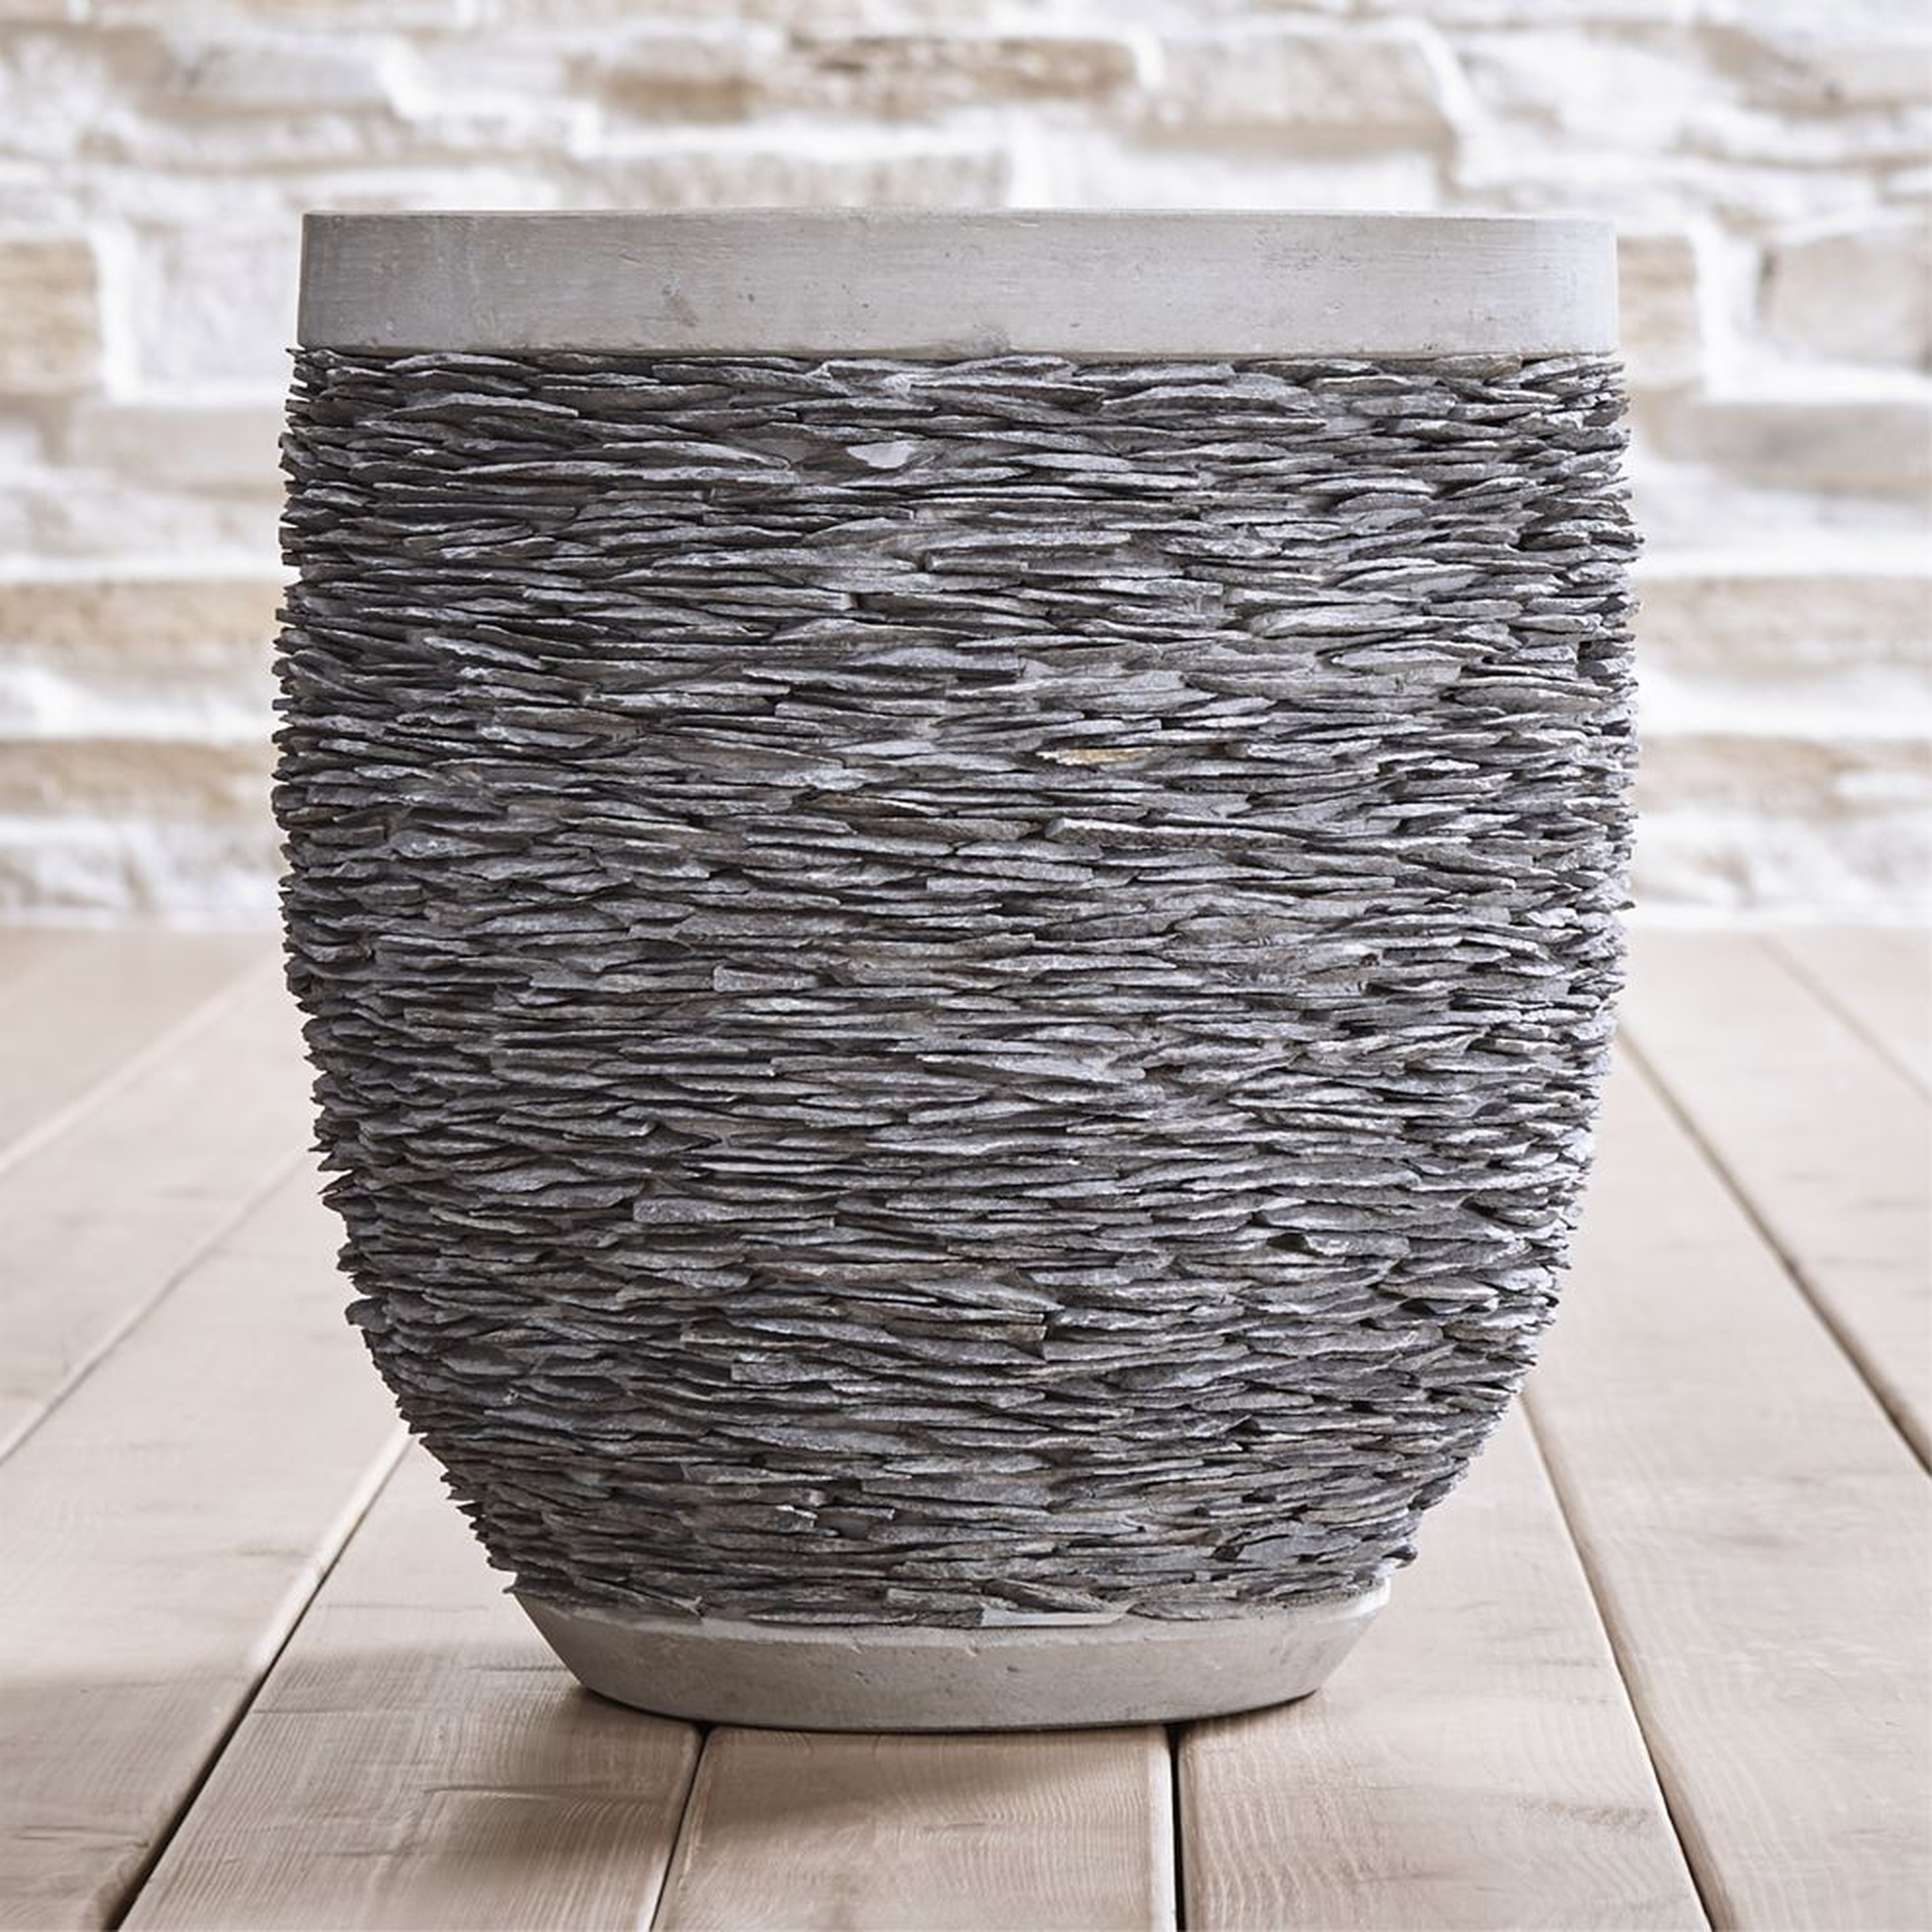 Stacked Large Rock Planter - Crate and Barrel